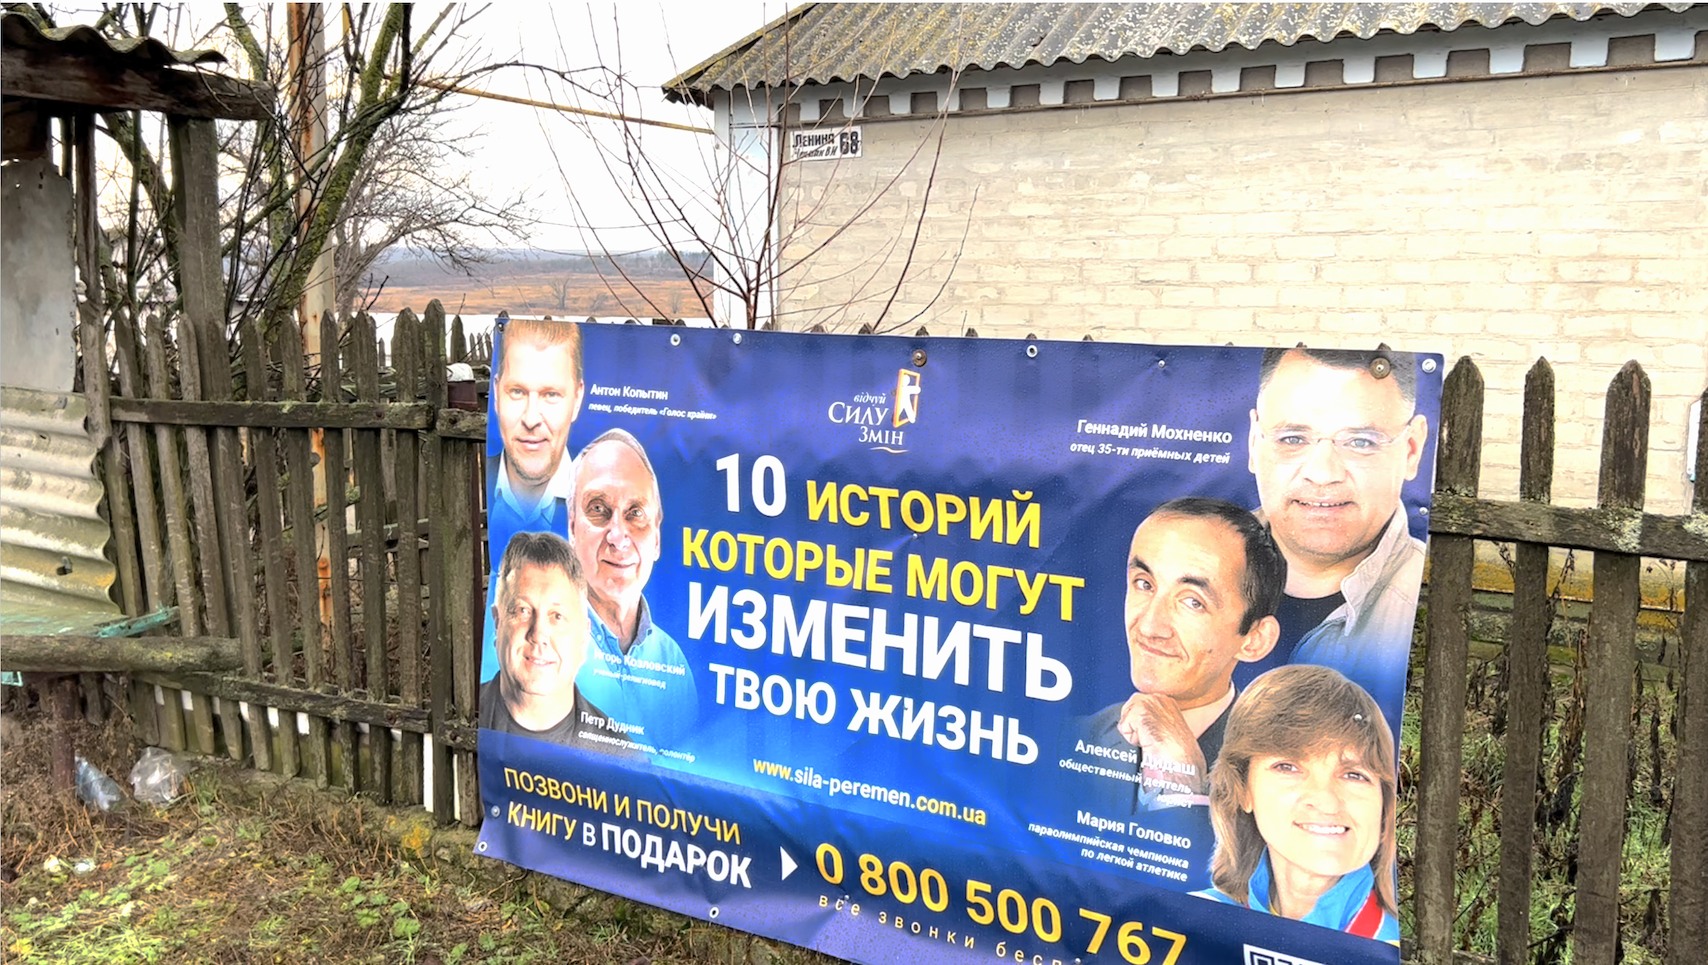 The village of Chermalyk in the war zone. A campaign ad on the fence tells of God's life-changing power through the testimony of 10 highly recognizable people.